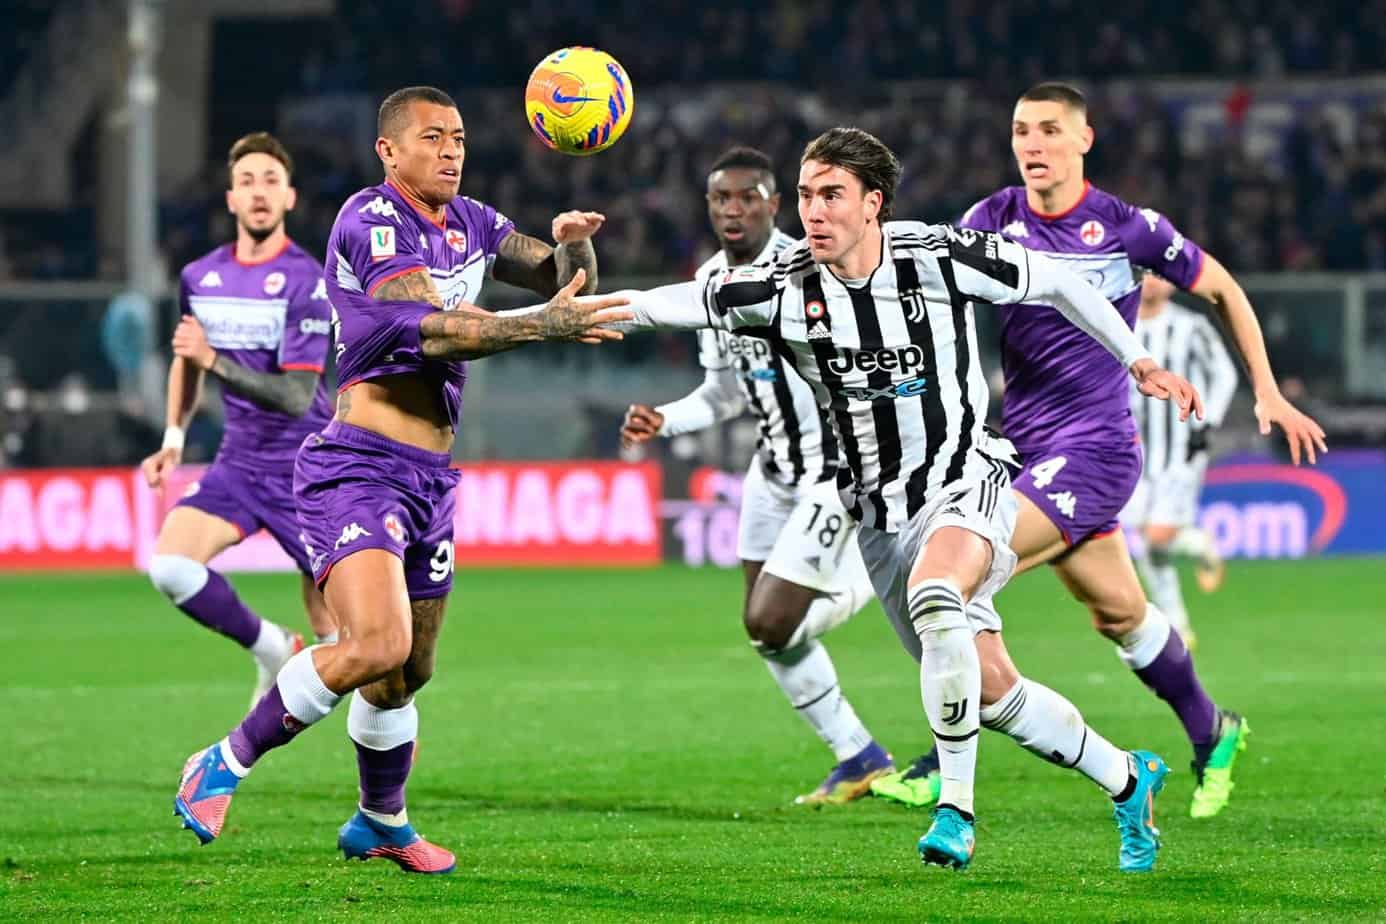 Fiorentina vs. Juventus Preview and Betting Odds